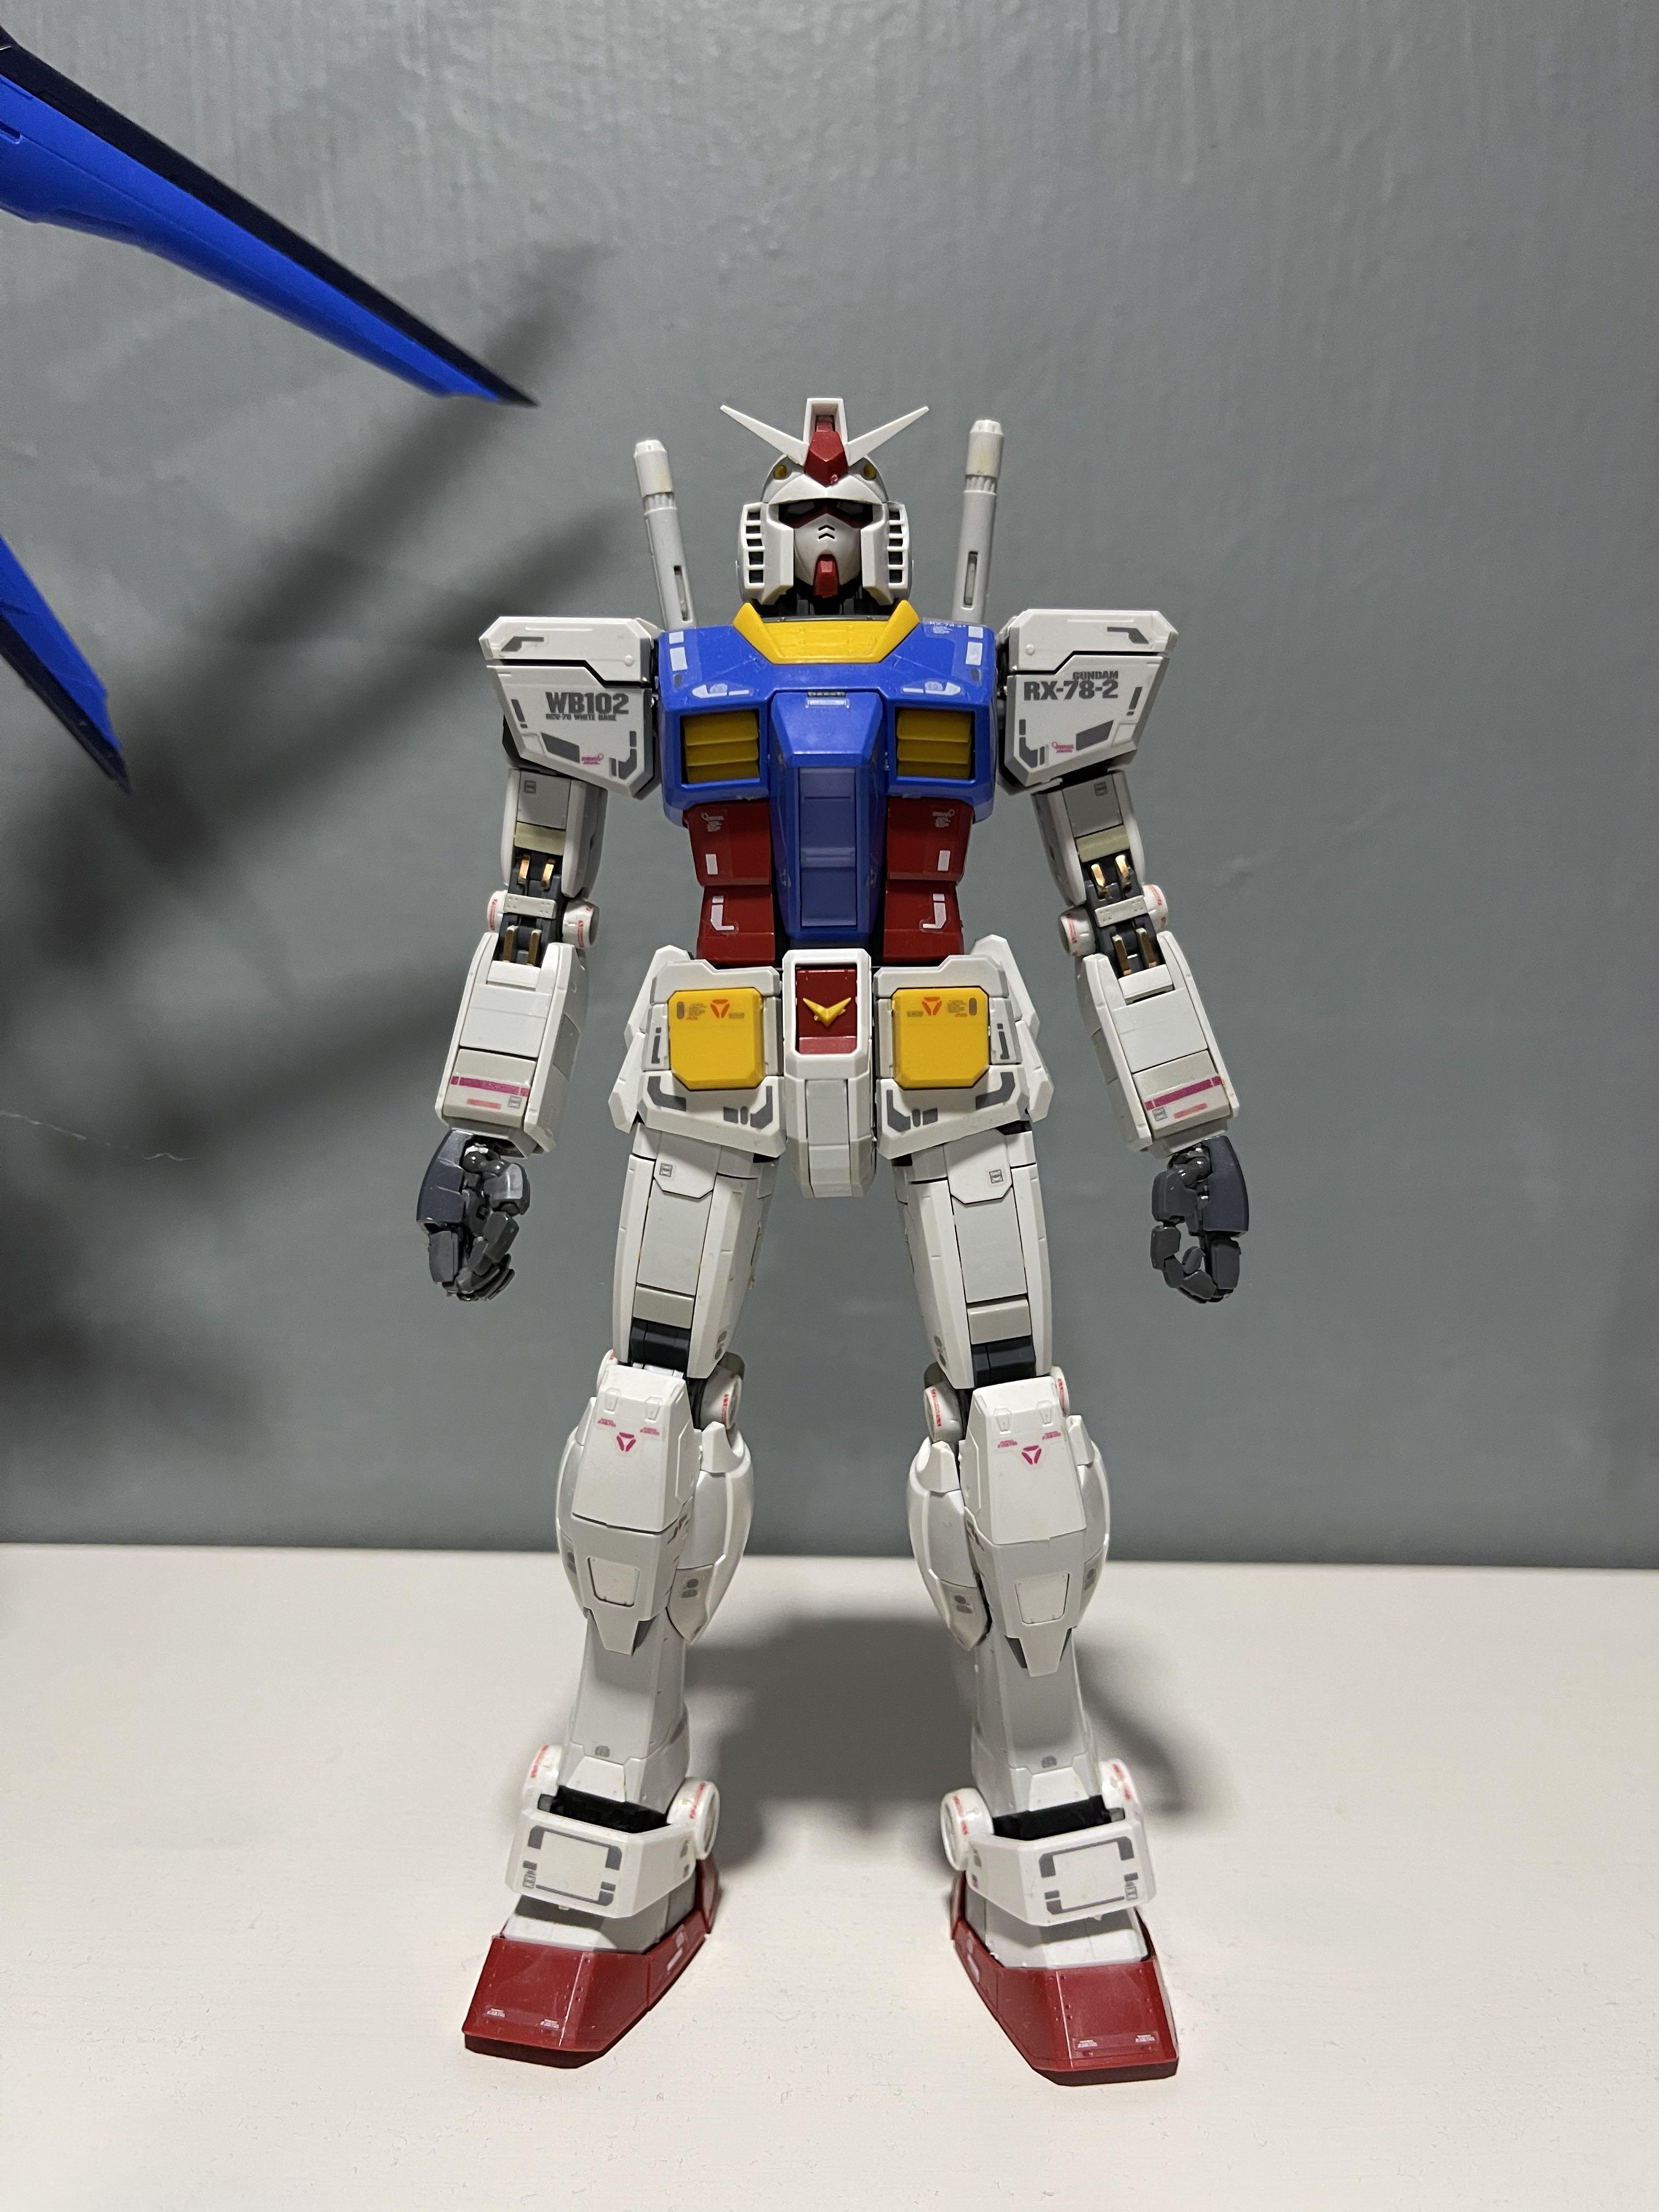 Gundam Rx 78 2 3 0 Toys Games Action Figures Collectibles On Carousell